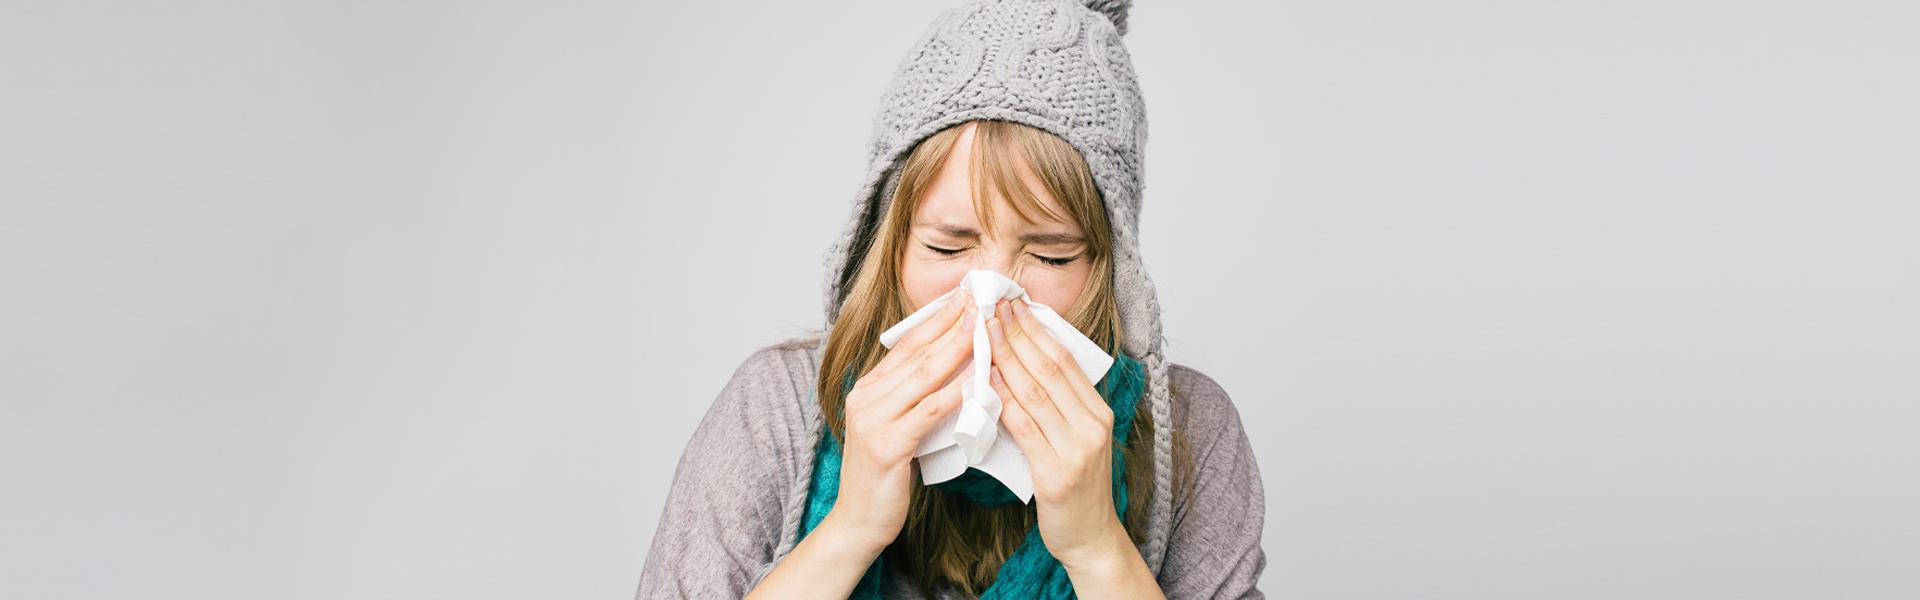 Learn About the Flu to Prevent it and Stay Safe